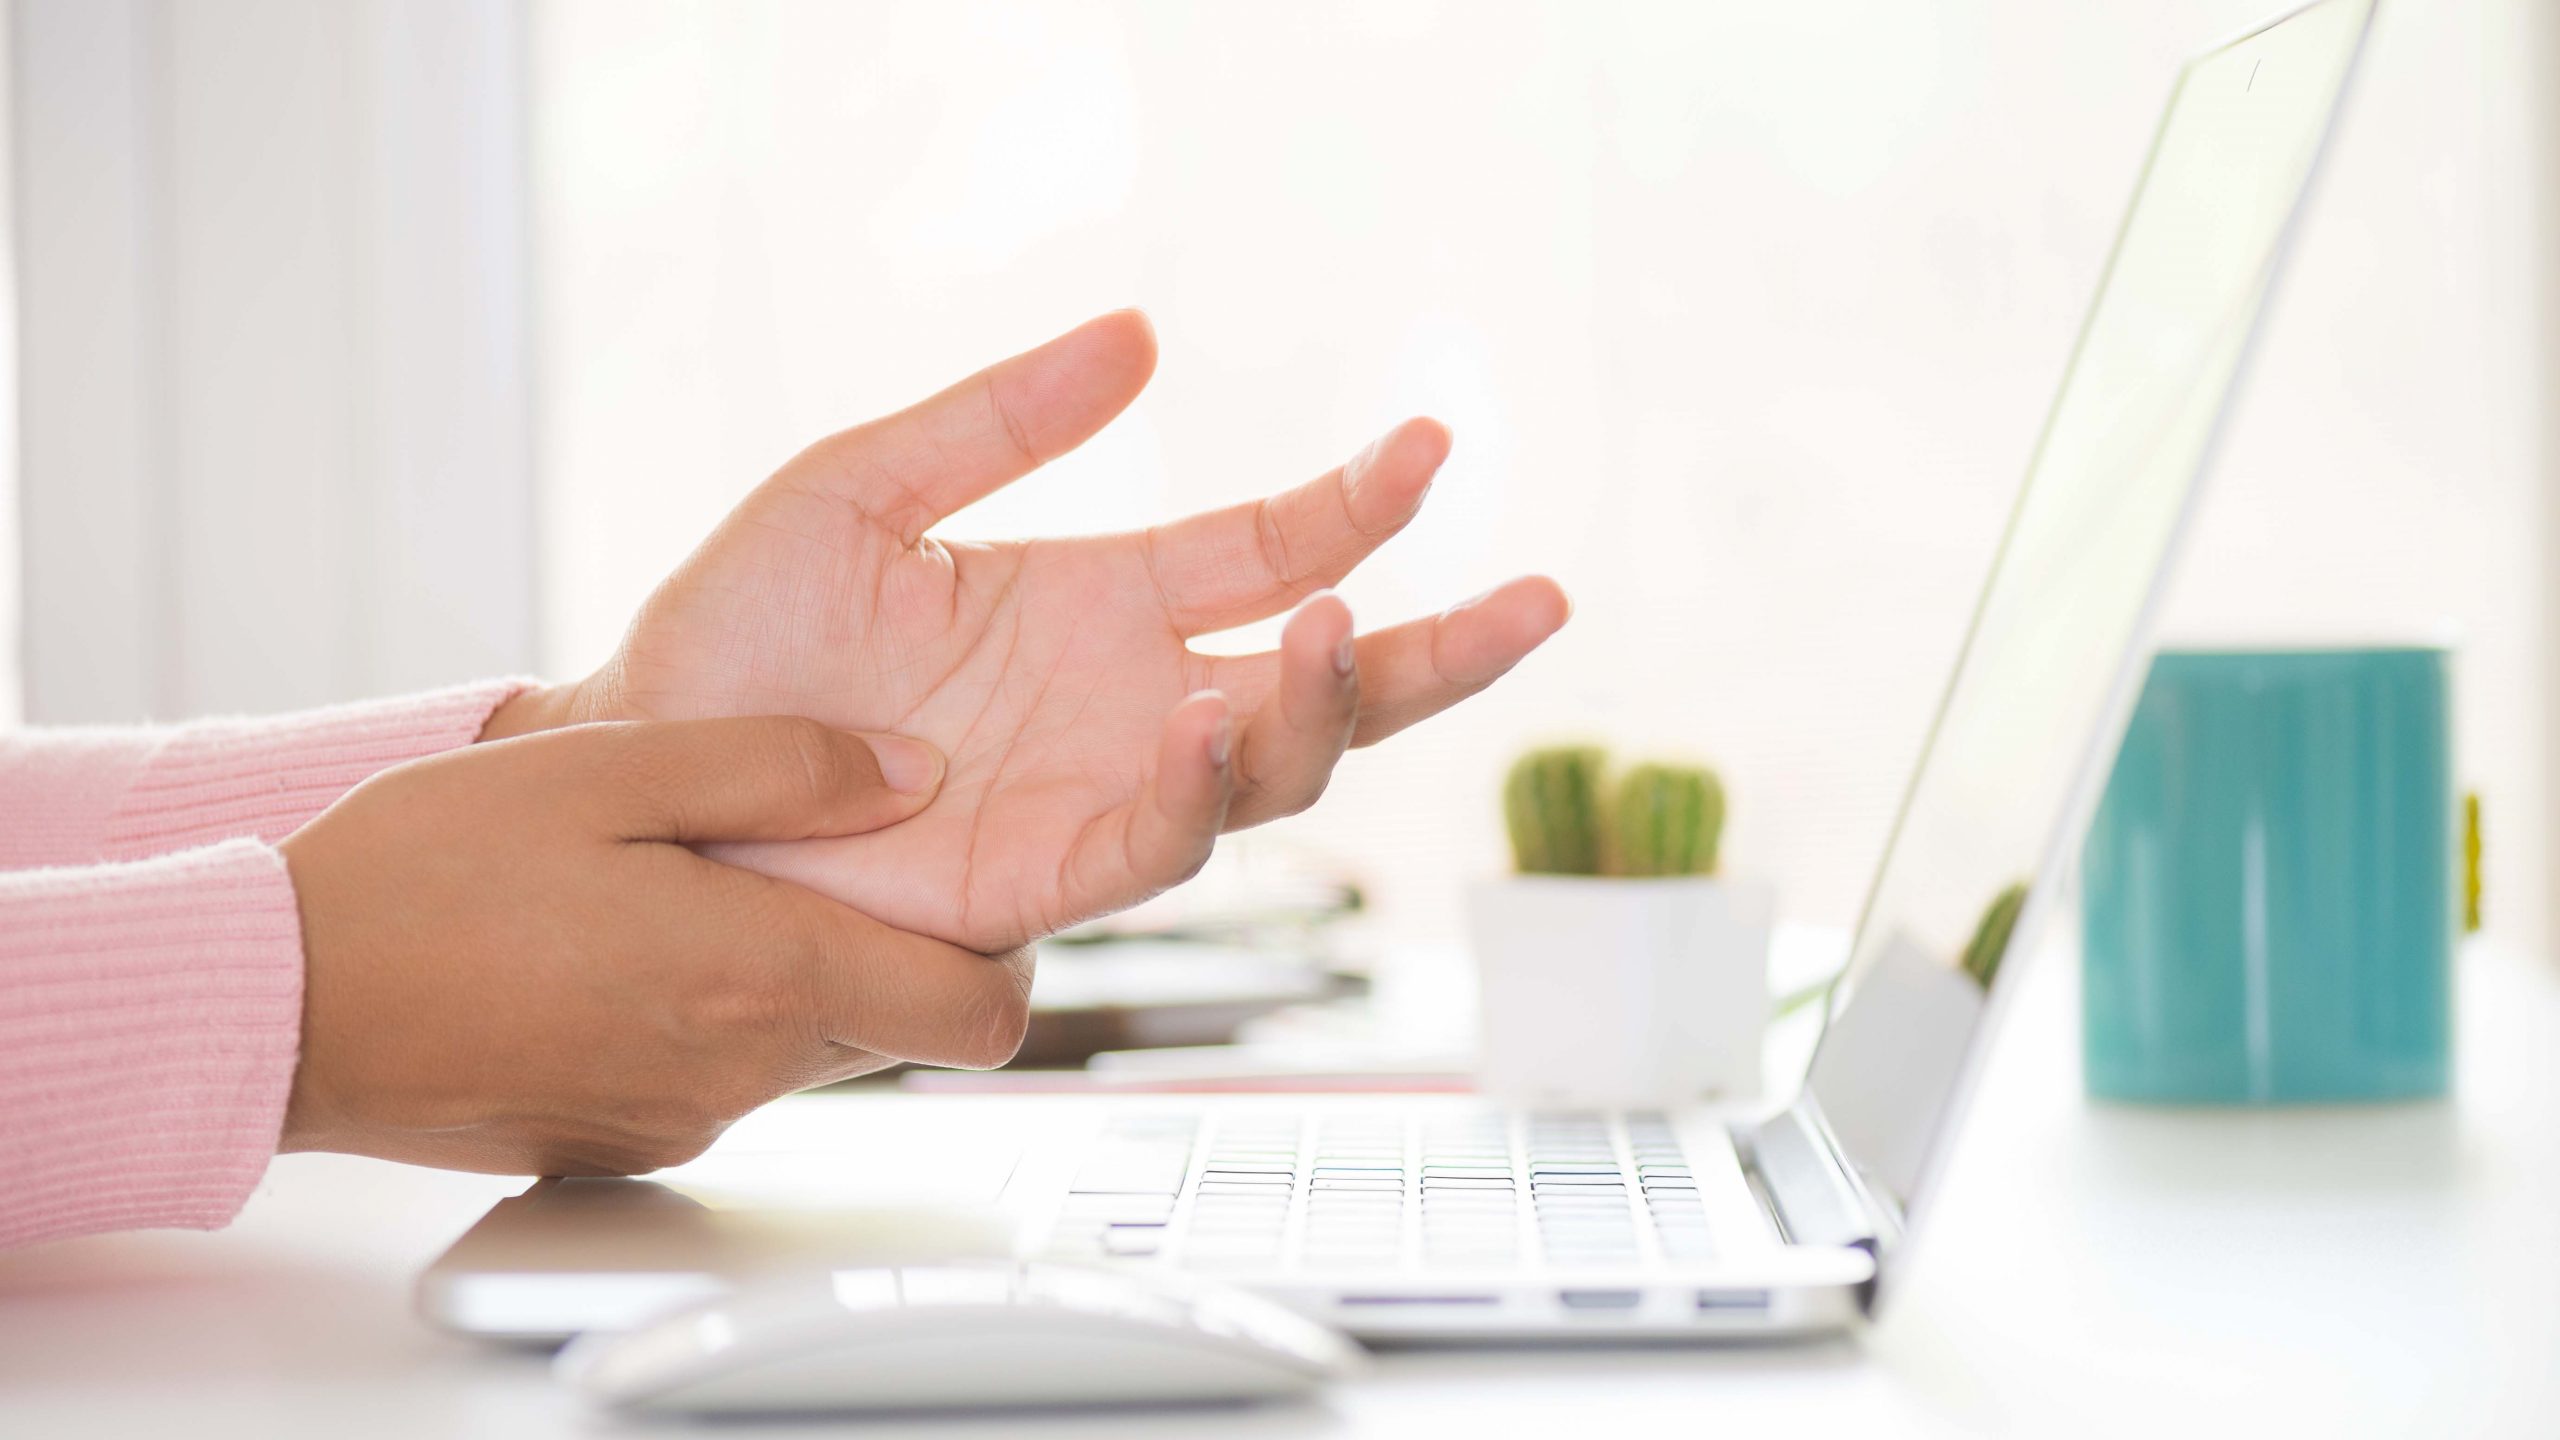 Typing and tapping despite hand pain - Harvard Health